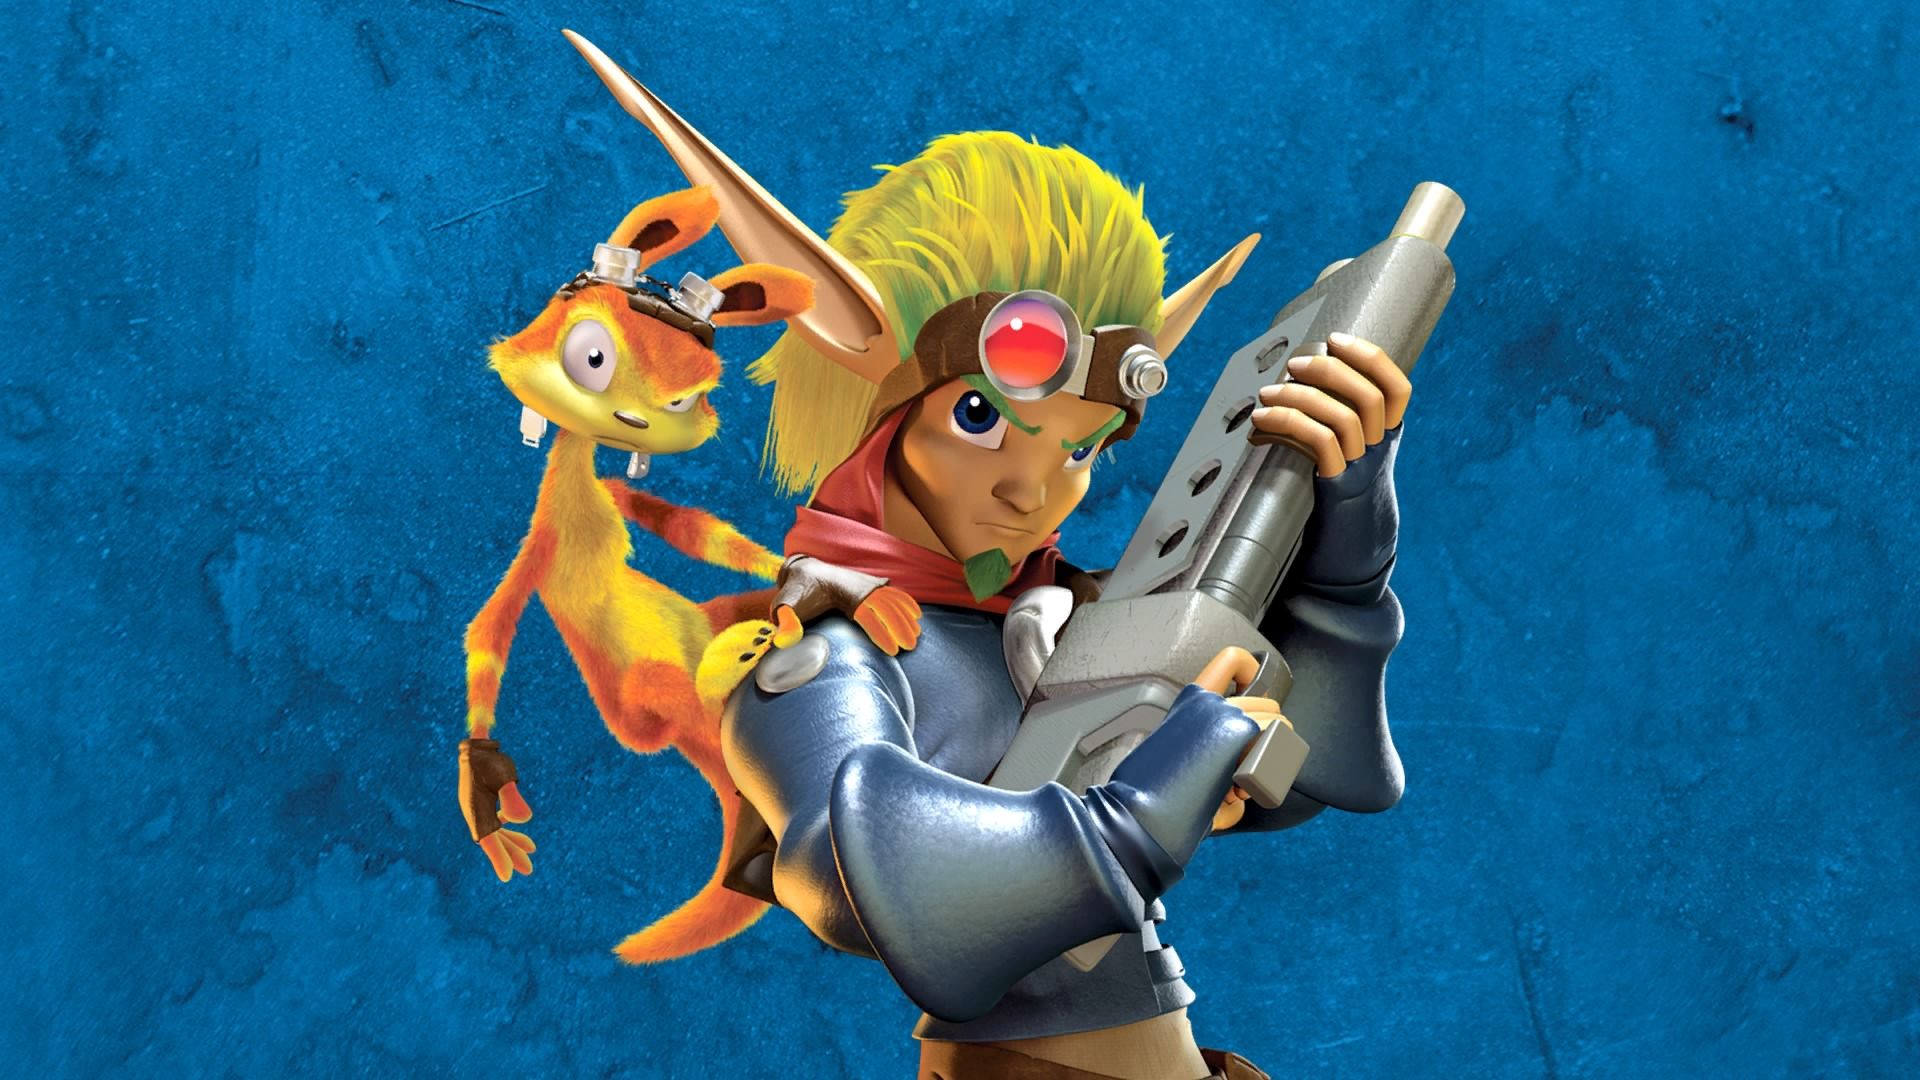 Jak And Daxter Images Jak Ii Mmd Hd Wallpaper And Background  Jak Ii PNG  Image  Transparent PNG Free Download on SeekPNG